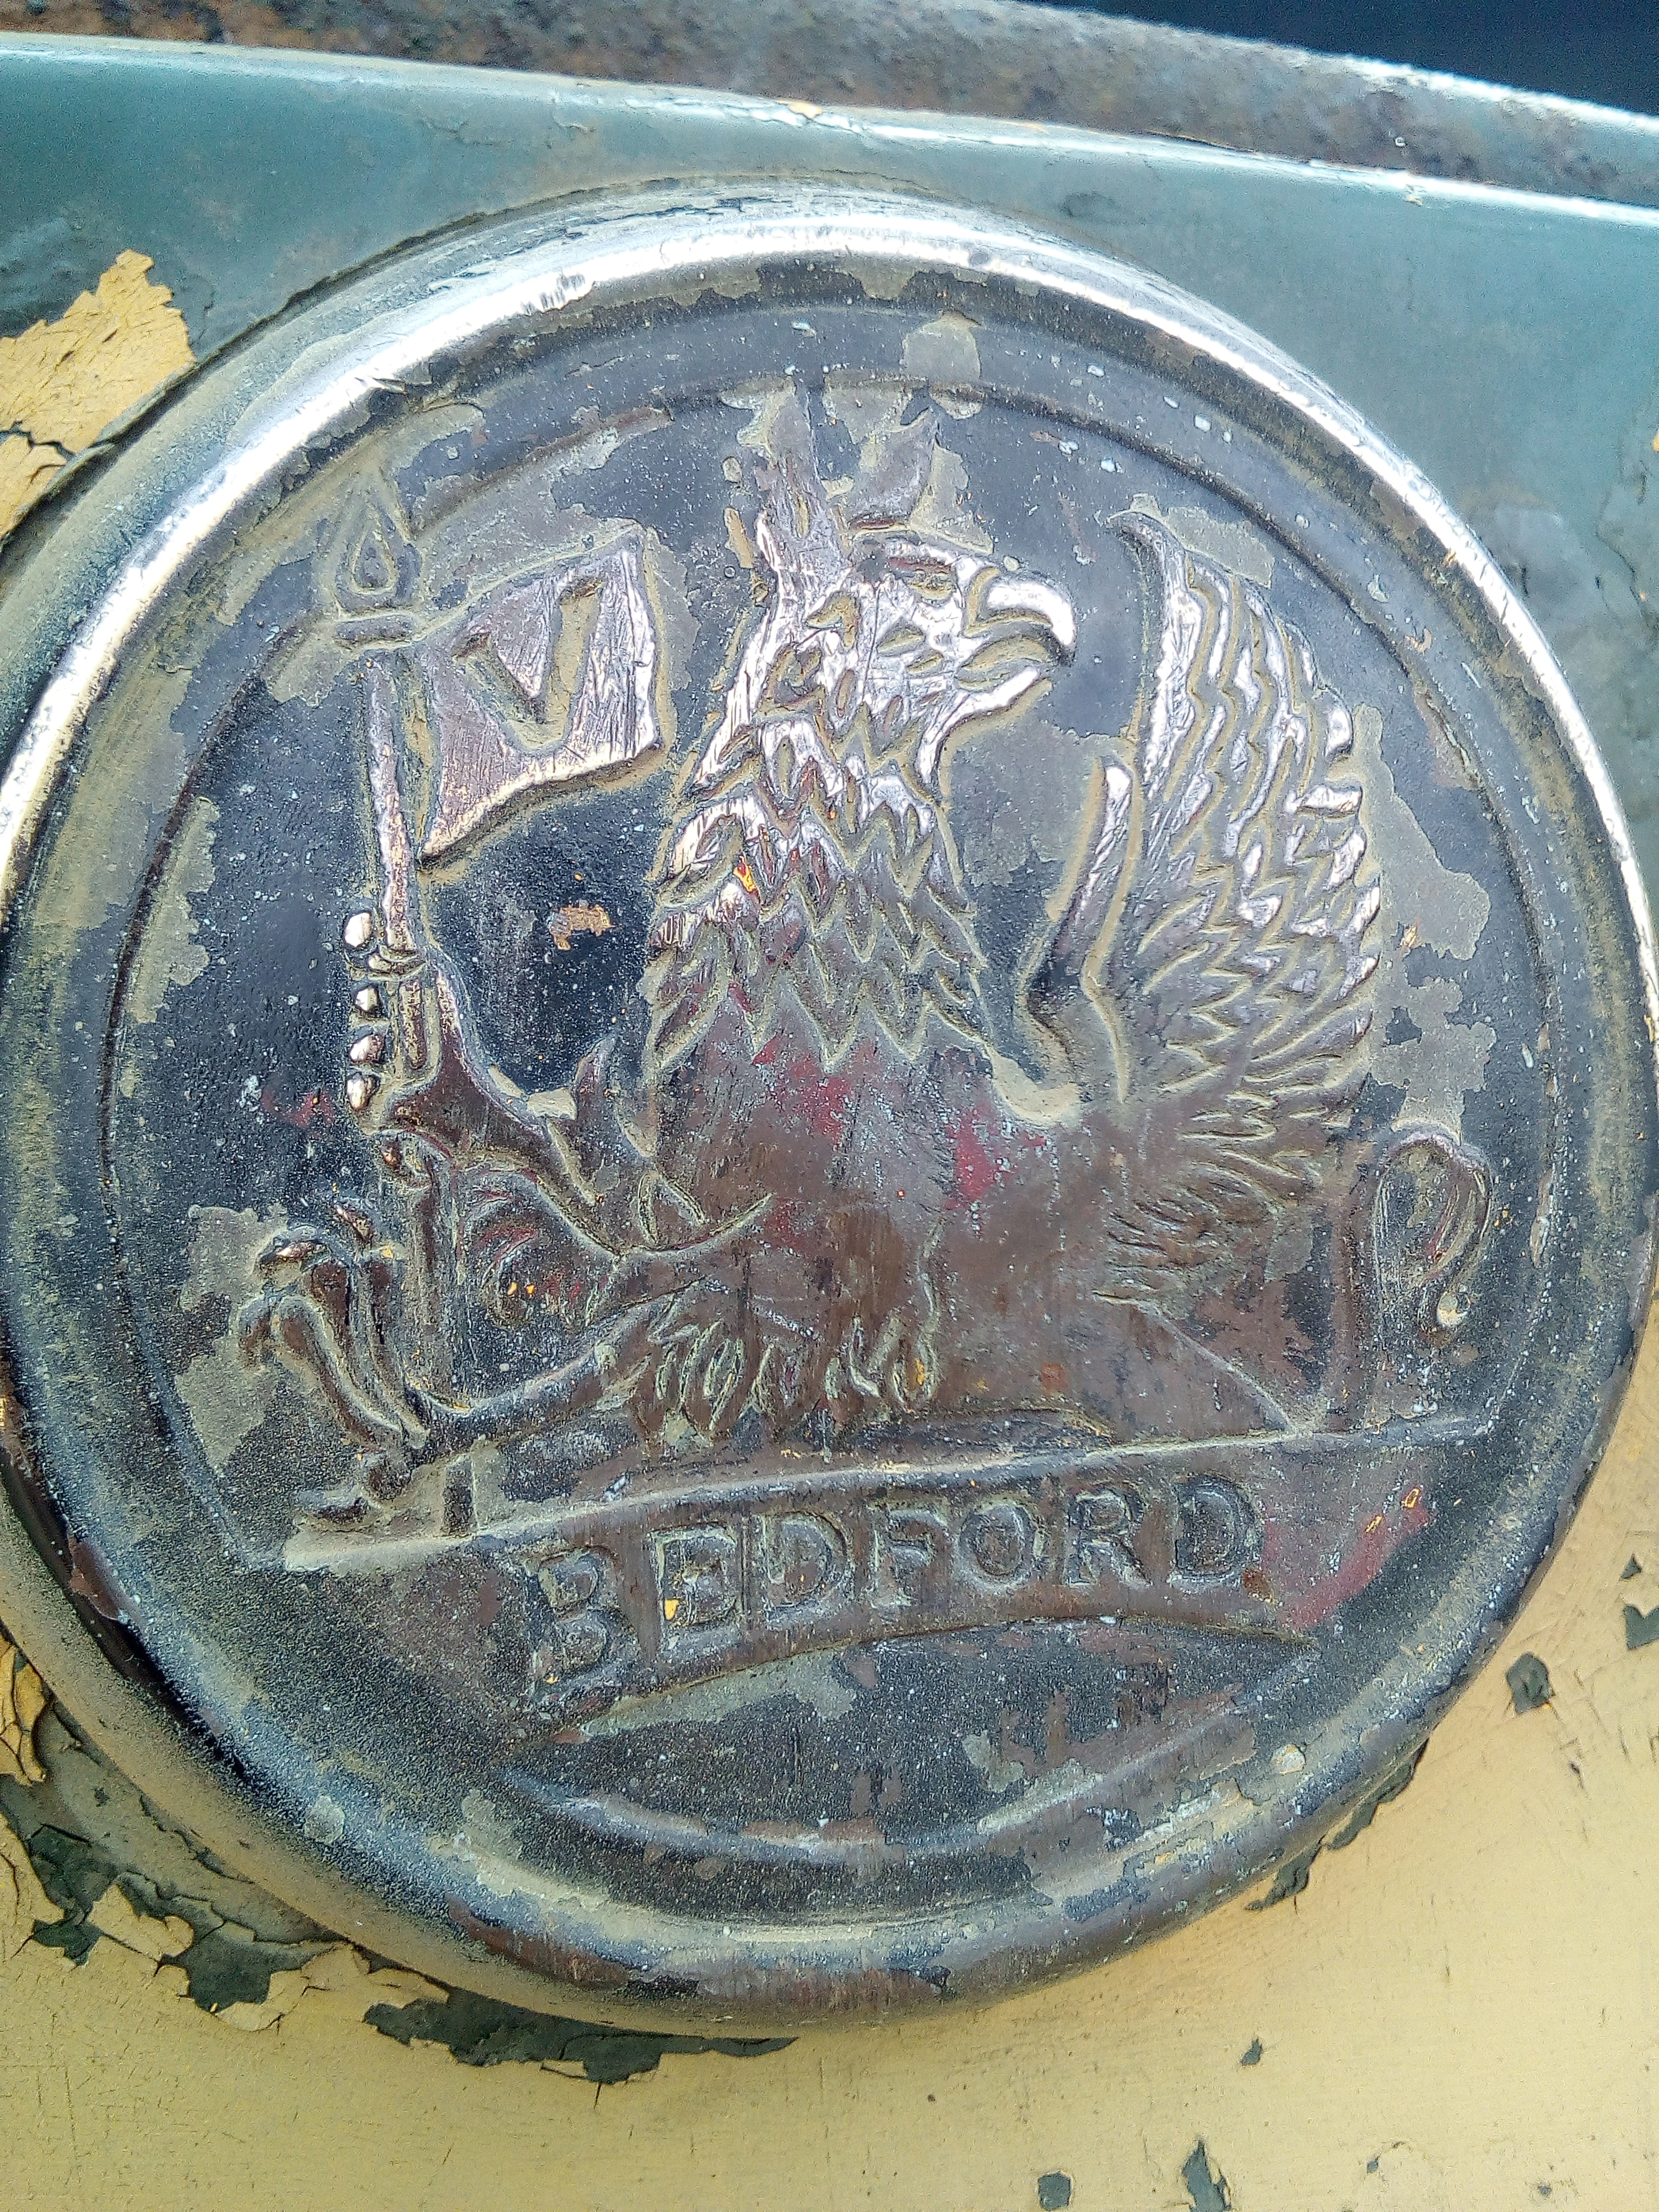 The Bedford's gryphon grille badge, very lightly polished up.